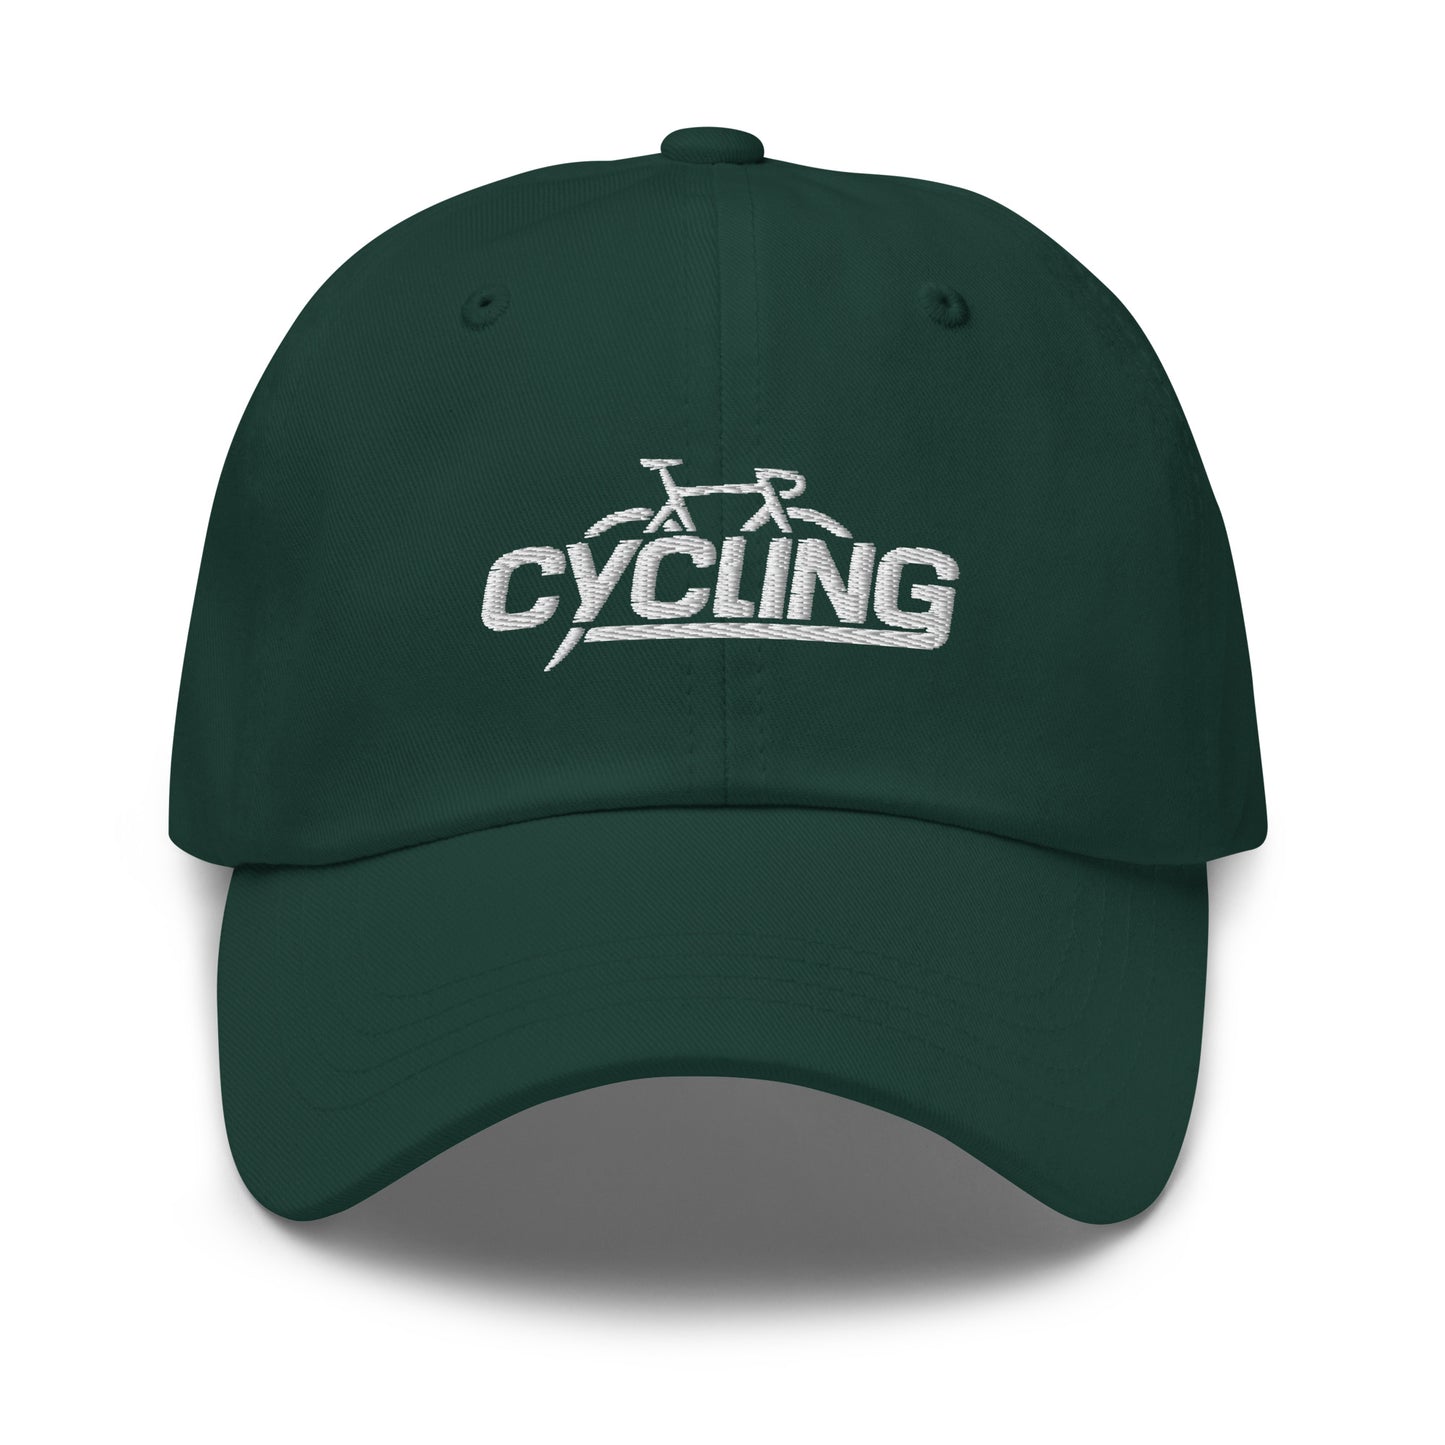 Cycling hat, Bicycle hat, bike hat, cycle hat green